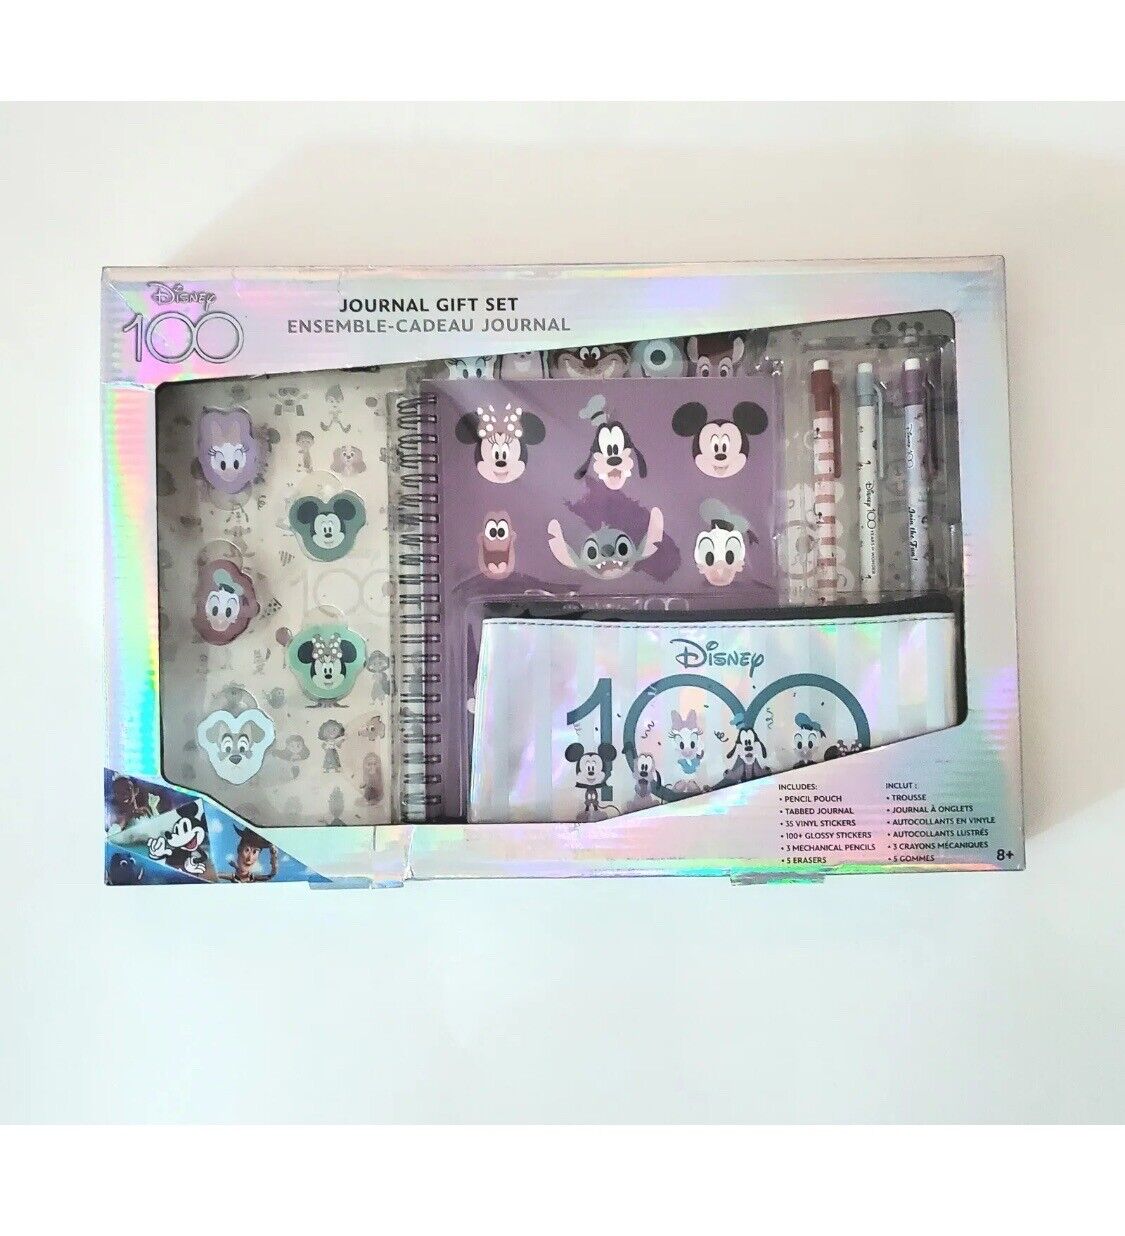 Disney 100 Journal Gift Set Pencils, Journal Stickers, Erasers, Pouch New In Box